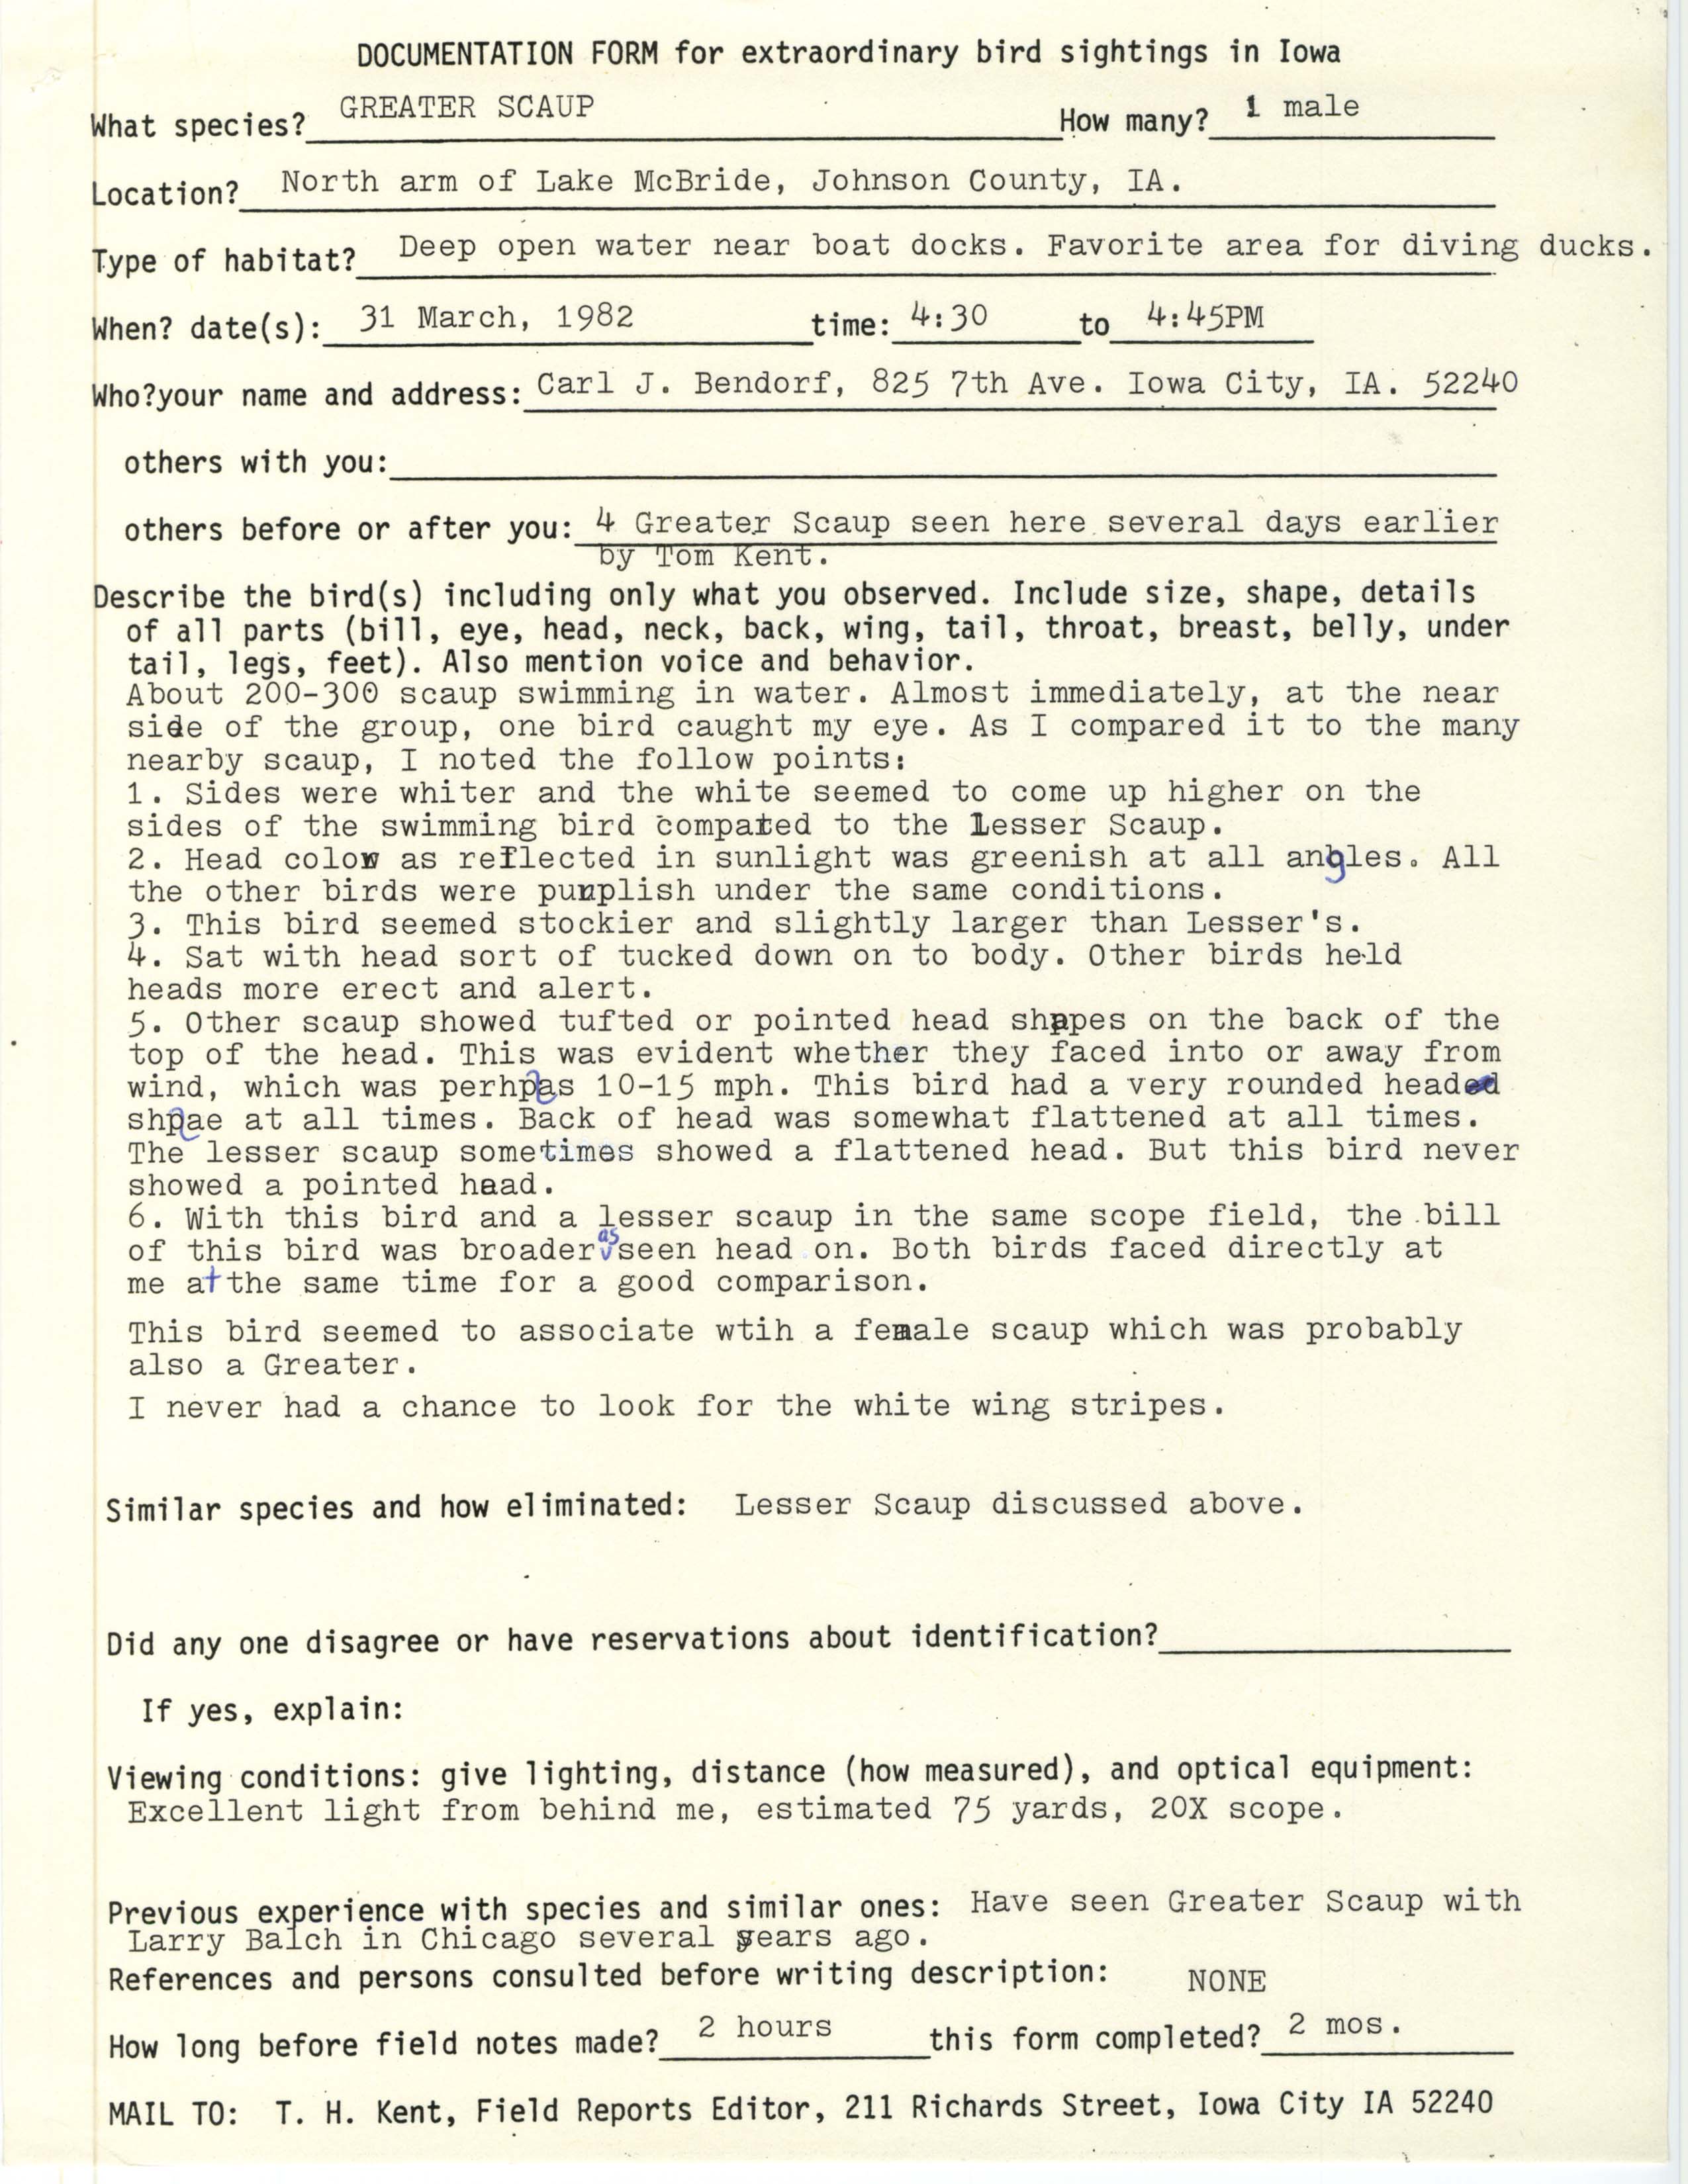 Rare bird documentation form for Greater Scaup at Lake MacBride, 1982